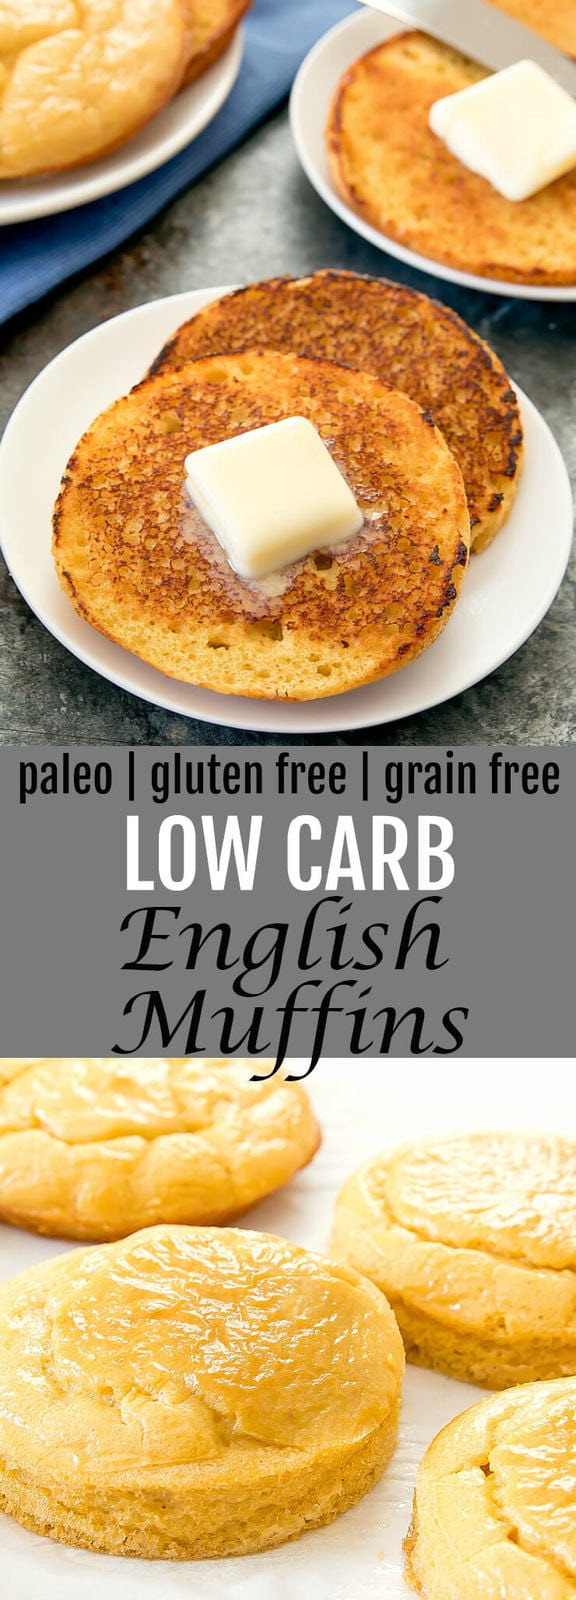 Low Carb English Muffin Recipes
 Low Carb Paleo English Muffins Kirbie s Cravings